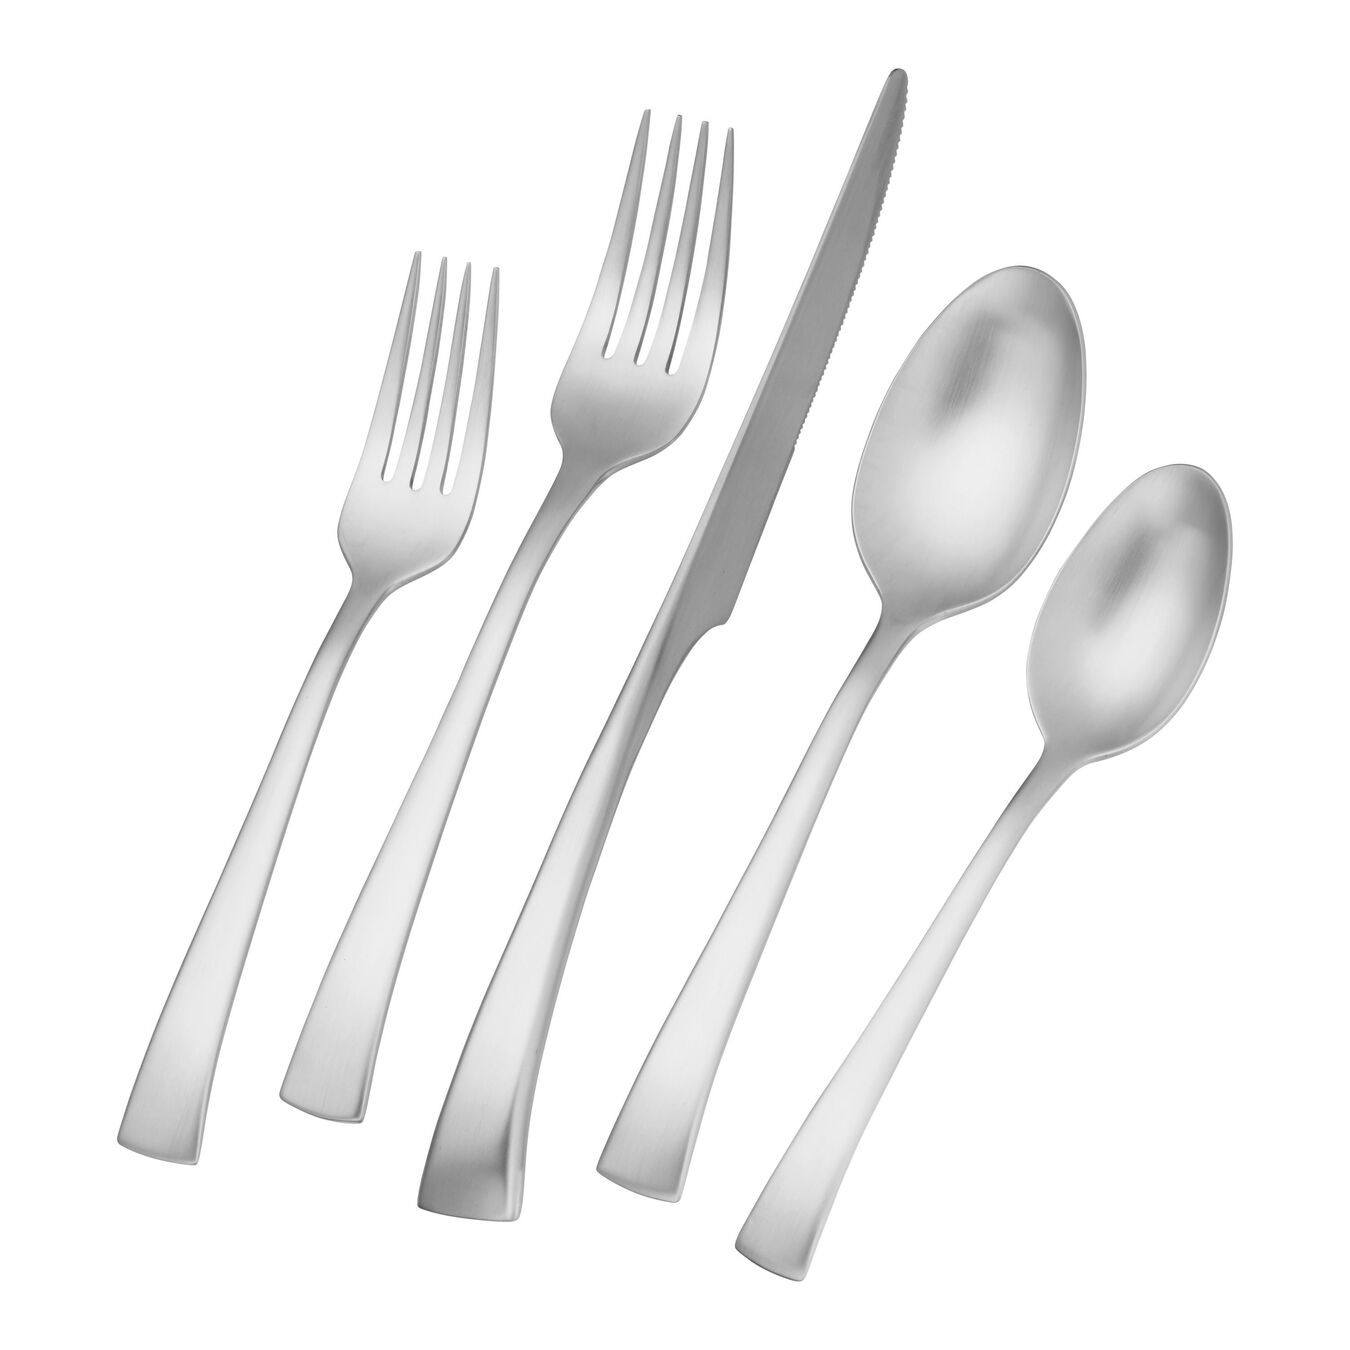 45-pc Flatware Set, 18/10 Stainless Steel,,large 1